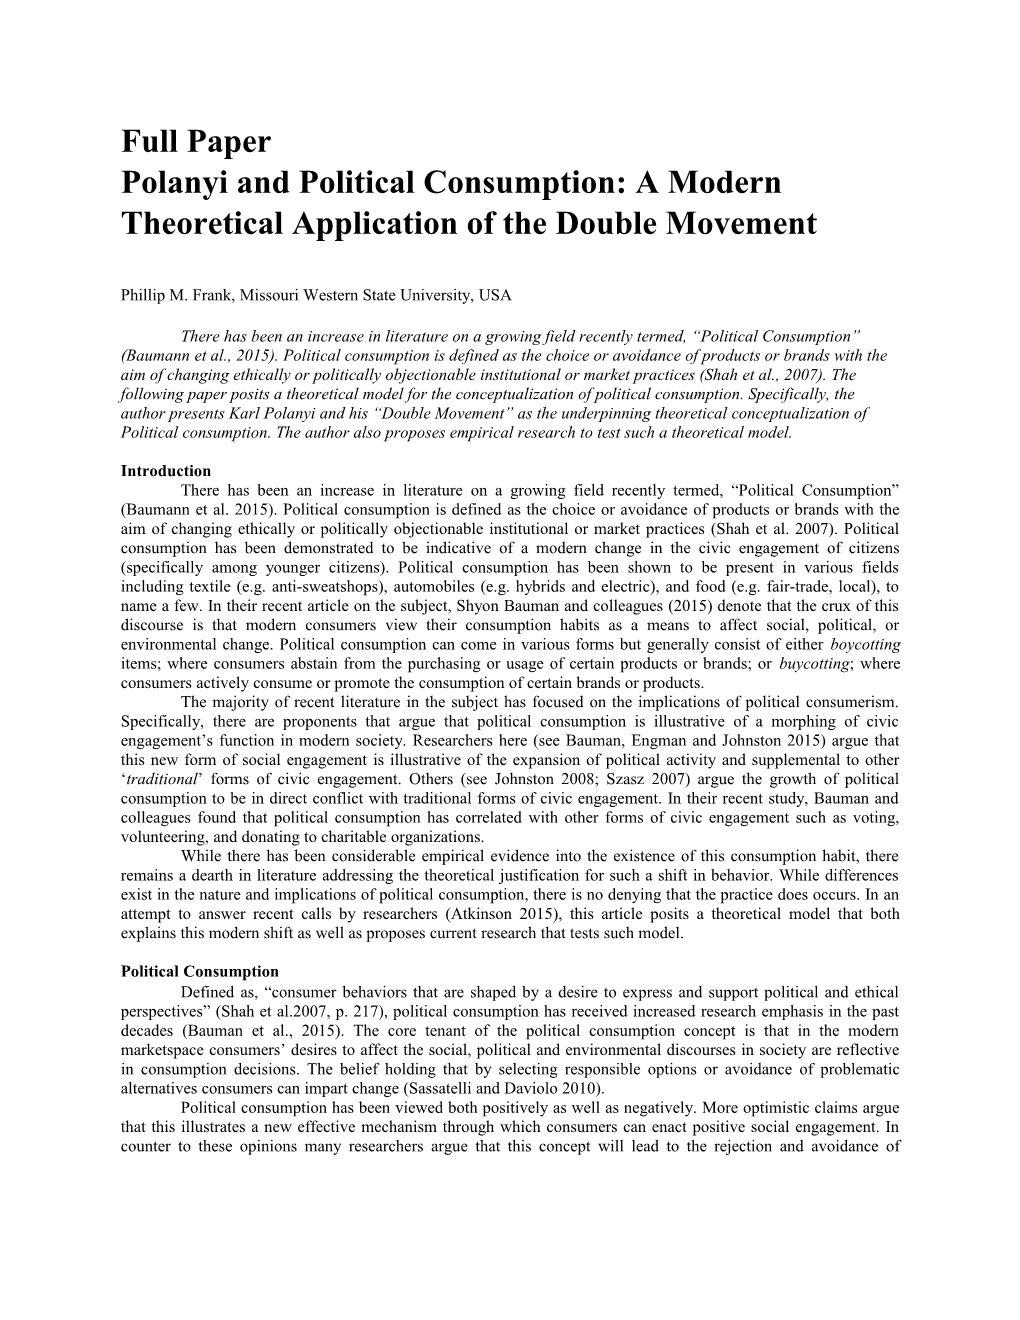 Polanyiand Political Consumption: a Modern Theoretical Applicationofthe Double Movement